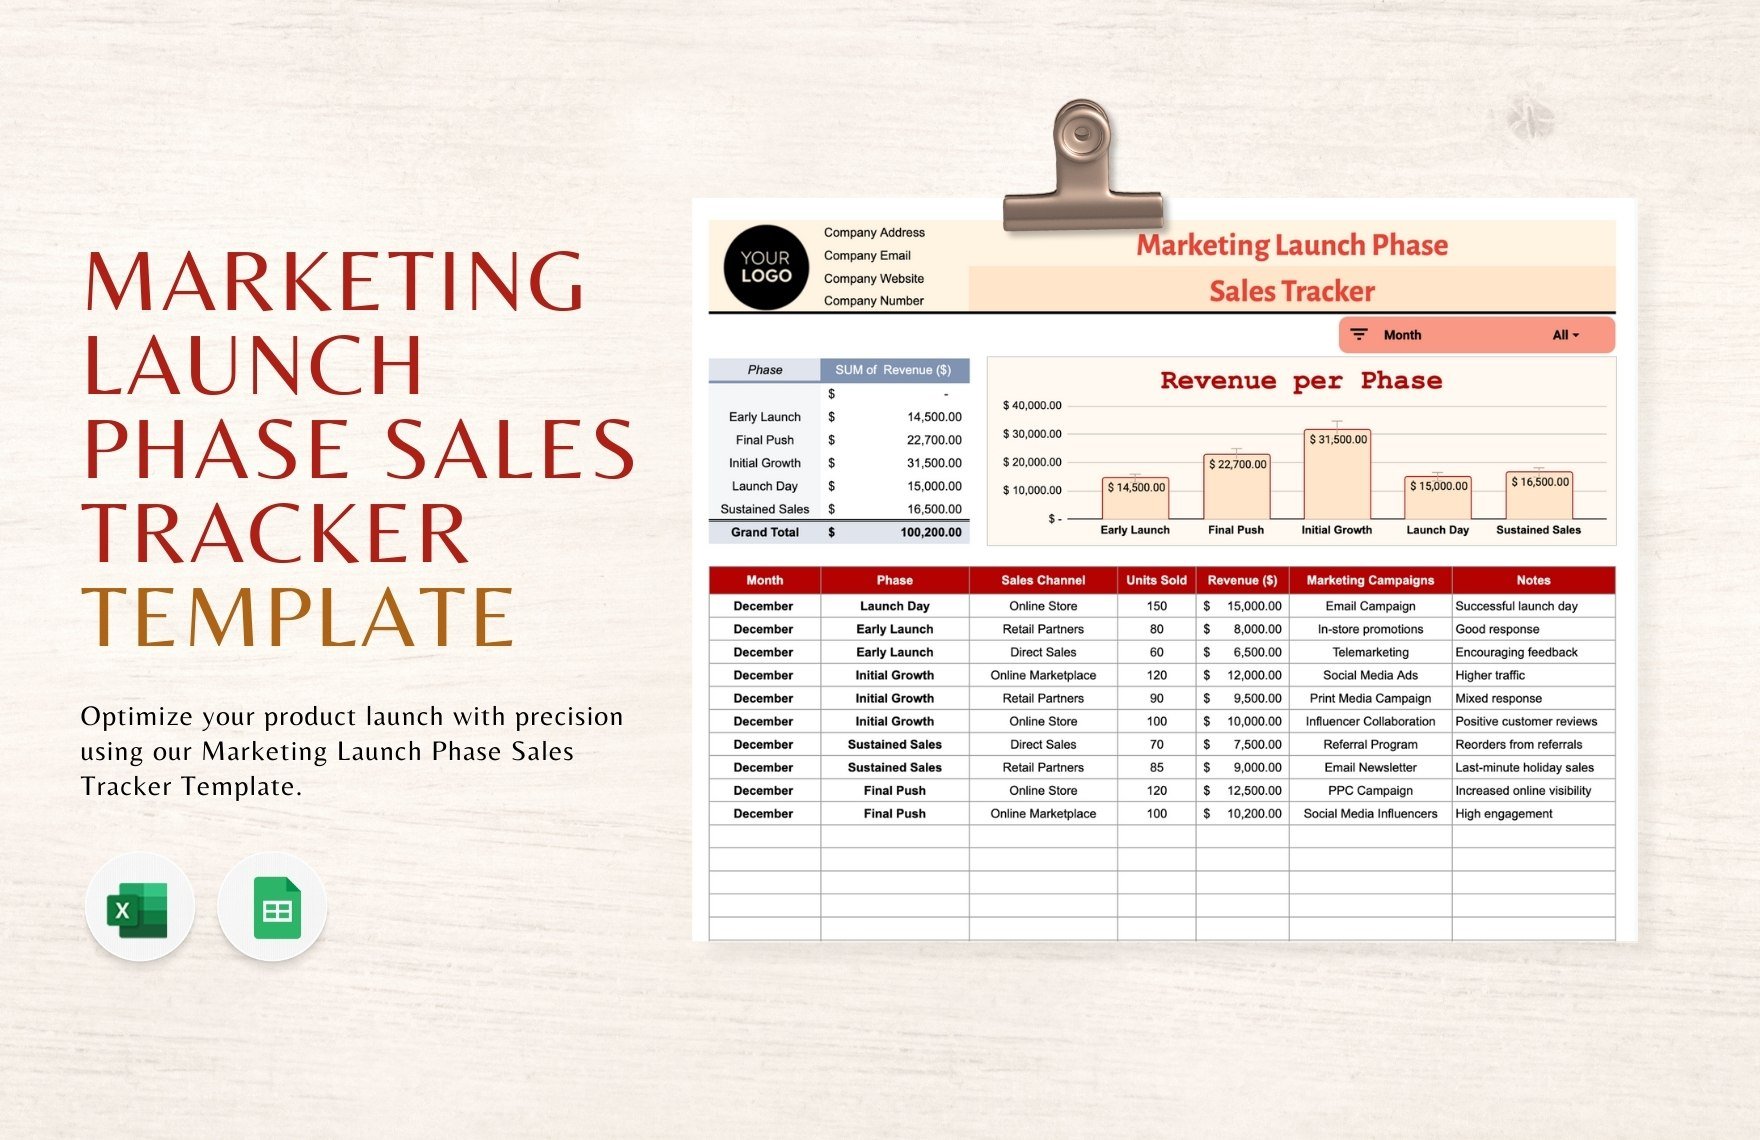 Marketing Launch Phase Sales Tracker Template